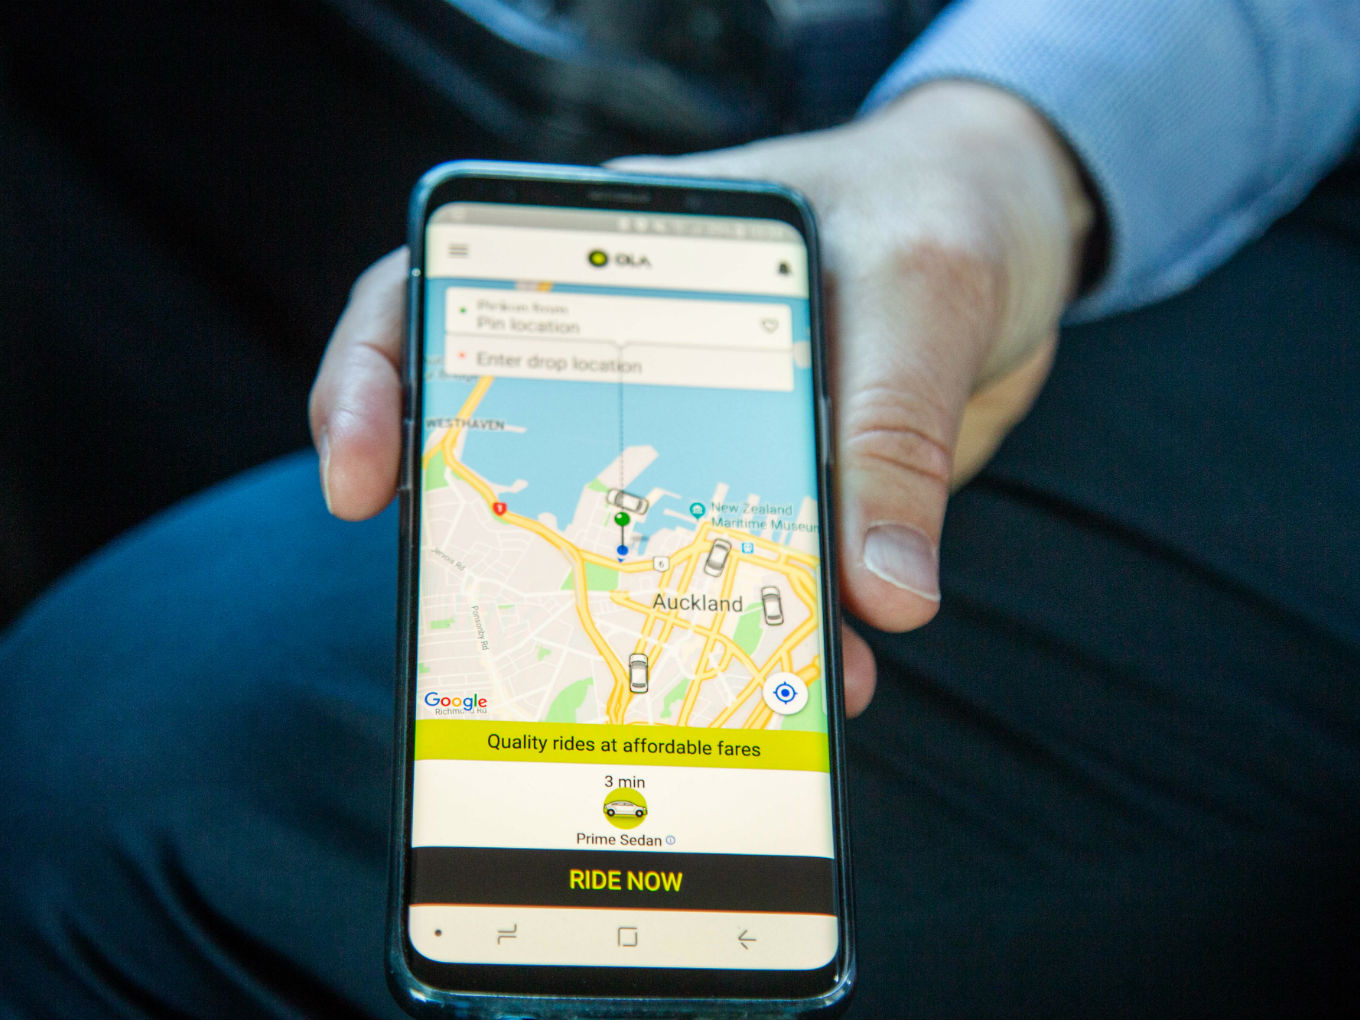 How Will Microsoft’s Investment Help Ola’s Mobility Ambitions?